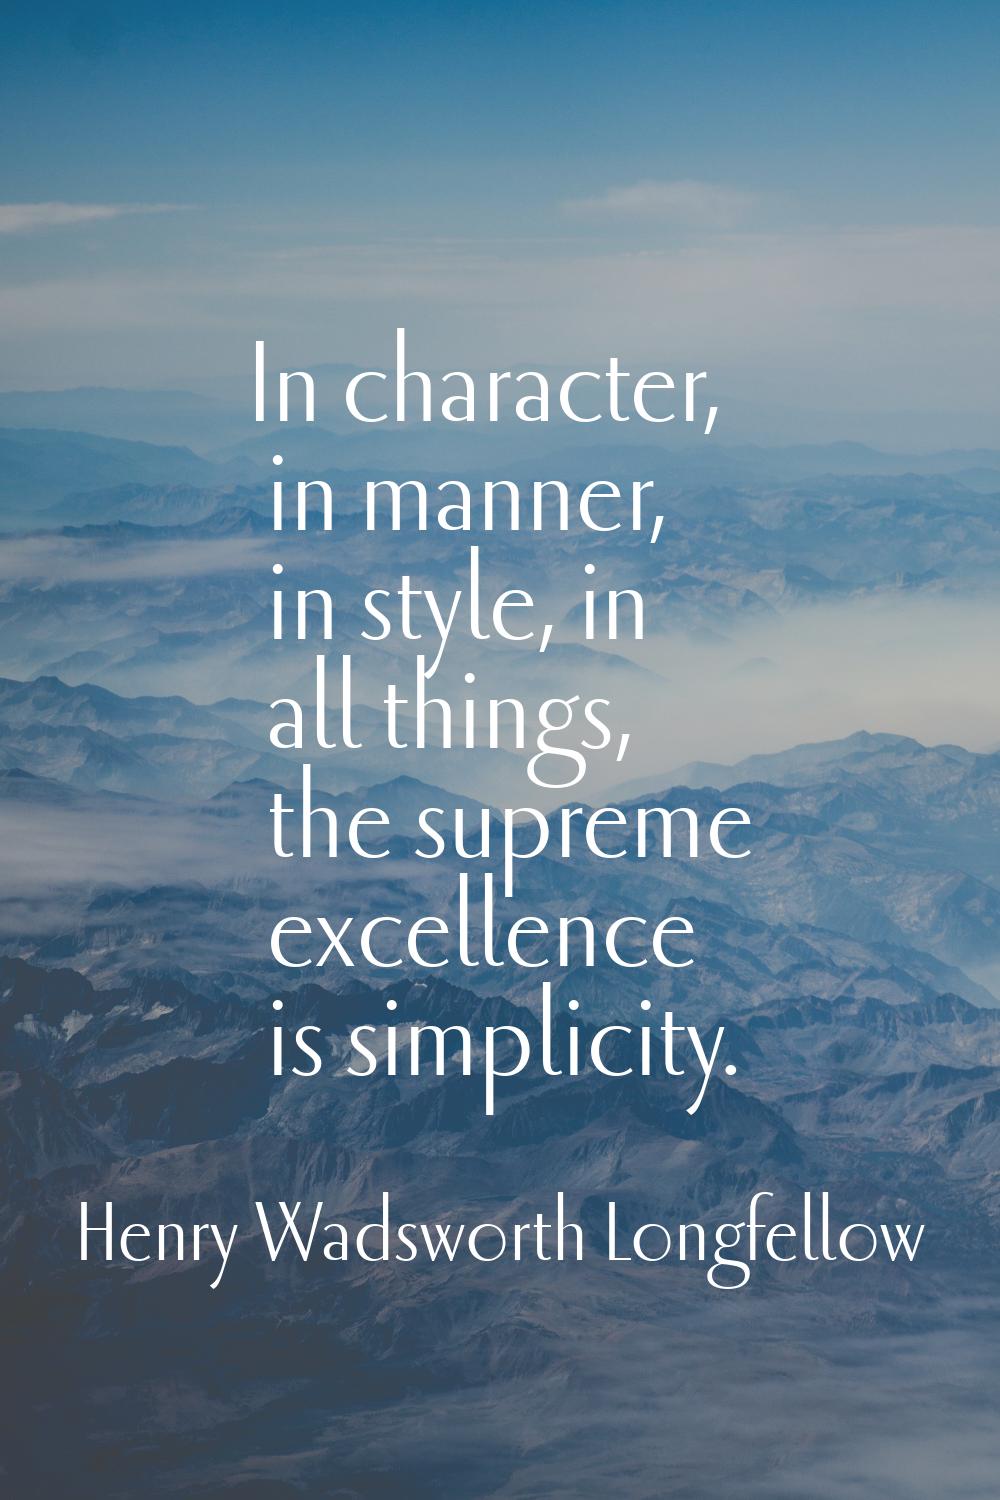 In character, in manner, in style, in all things, the supreme excellence is simplicity.